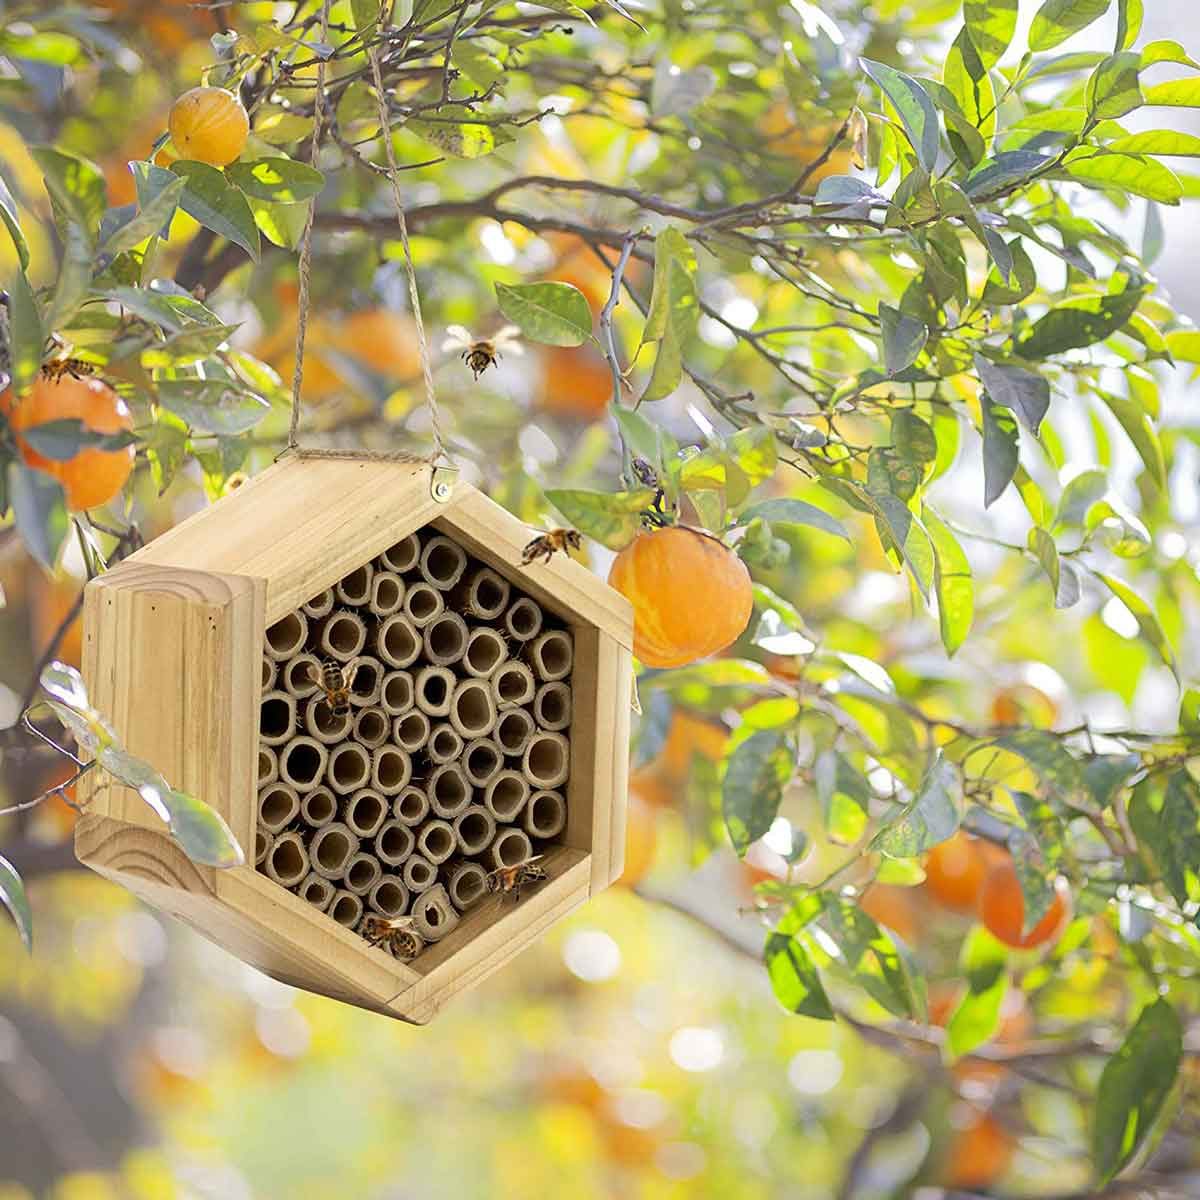 <p>Small enough to hang anywhere, the <a href="https://www.amazon.com/Mason-Bee-House-Pollinators-Productivity/dp/B07T73Q18D" rel="noopener noreferrer">Kibaga mason bee house</a> is made of bamboo. It provides a safe and sustainable environment for non-swarming (solitary) mason bees (AKA orchard bees). To <a href="https://www.familyhandyman.com/list/flowers-for-bees/">encourage these pollinators</a>, the octagon-shaped exterior surrounds 60 bamboo nesting tubes where bees can feel safe. Hang the house from the included rope in a sunny, dry area.</p> <p class="listicle-page__cta-button-shop"><a class="shop-btn" href="https://www.amazon.com/Mason-Bee-House-Pollinators-Productivity/dp/B07T73Q18D">Shop Now</a></p>